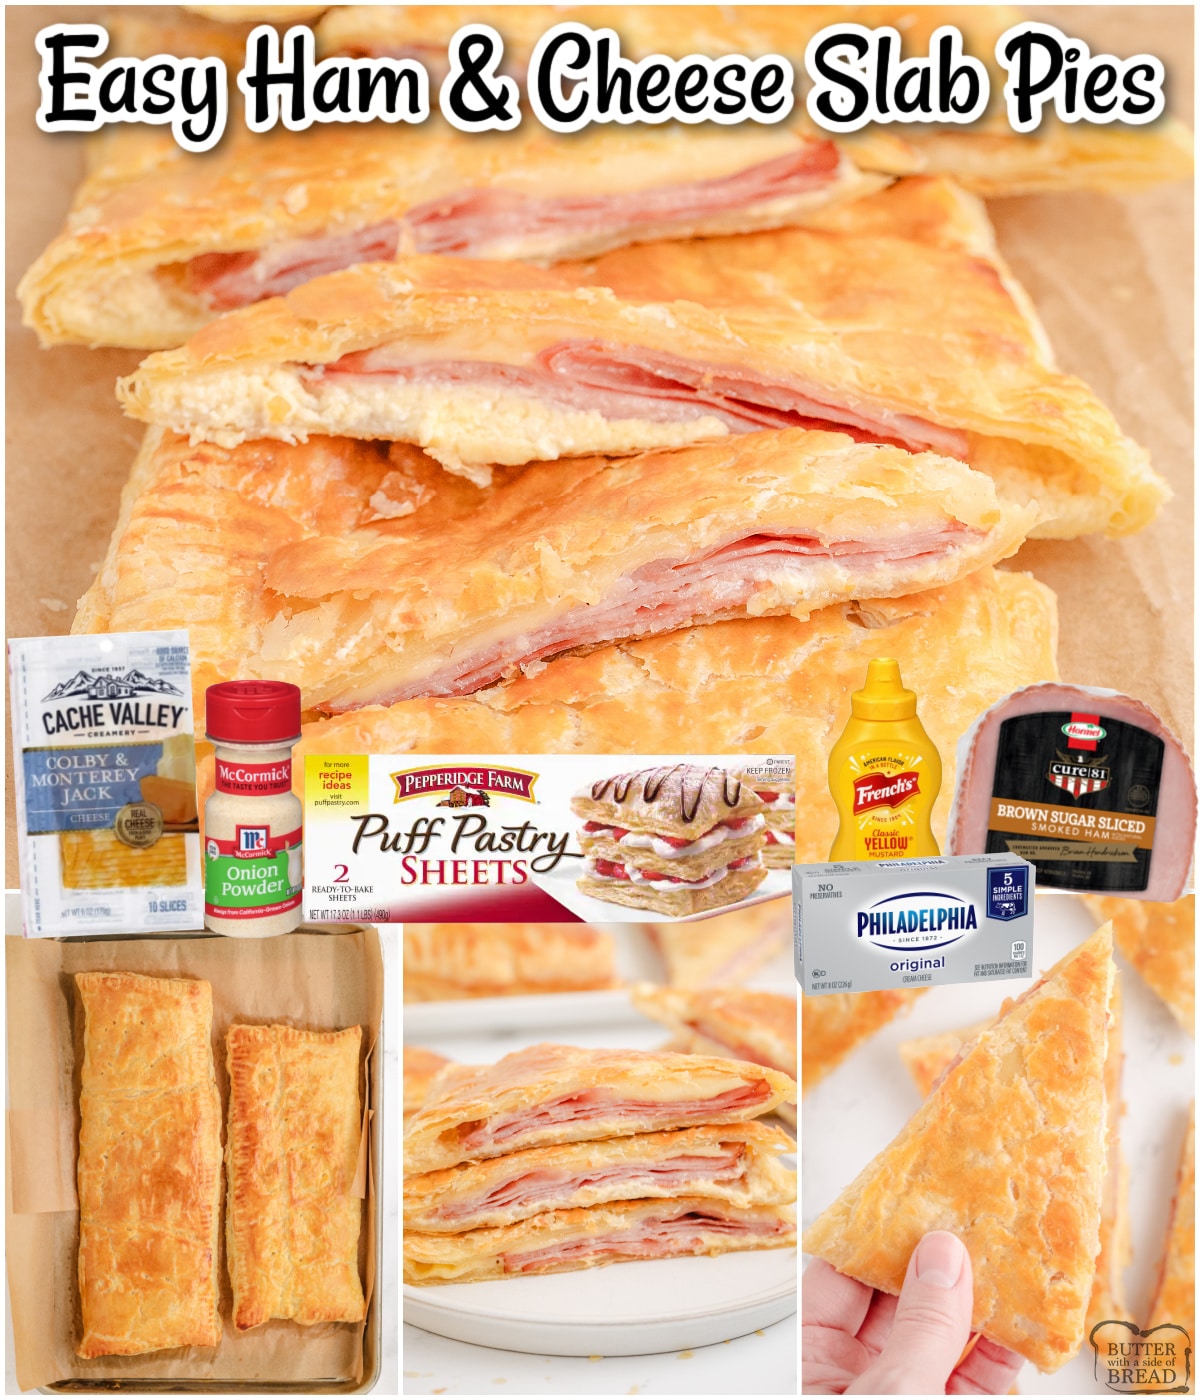 Flaky Ham and Cheese Slab Pies are made with a buttery crust and filled with savory ham and gooey cheese. This hot ham and cheese pastries are a delicious & easy-to-make recipe!